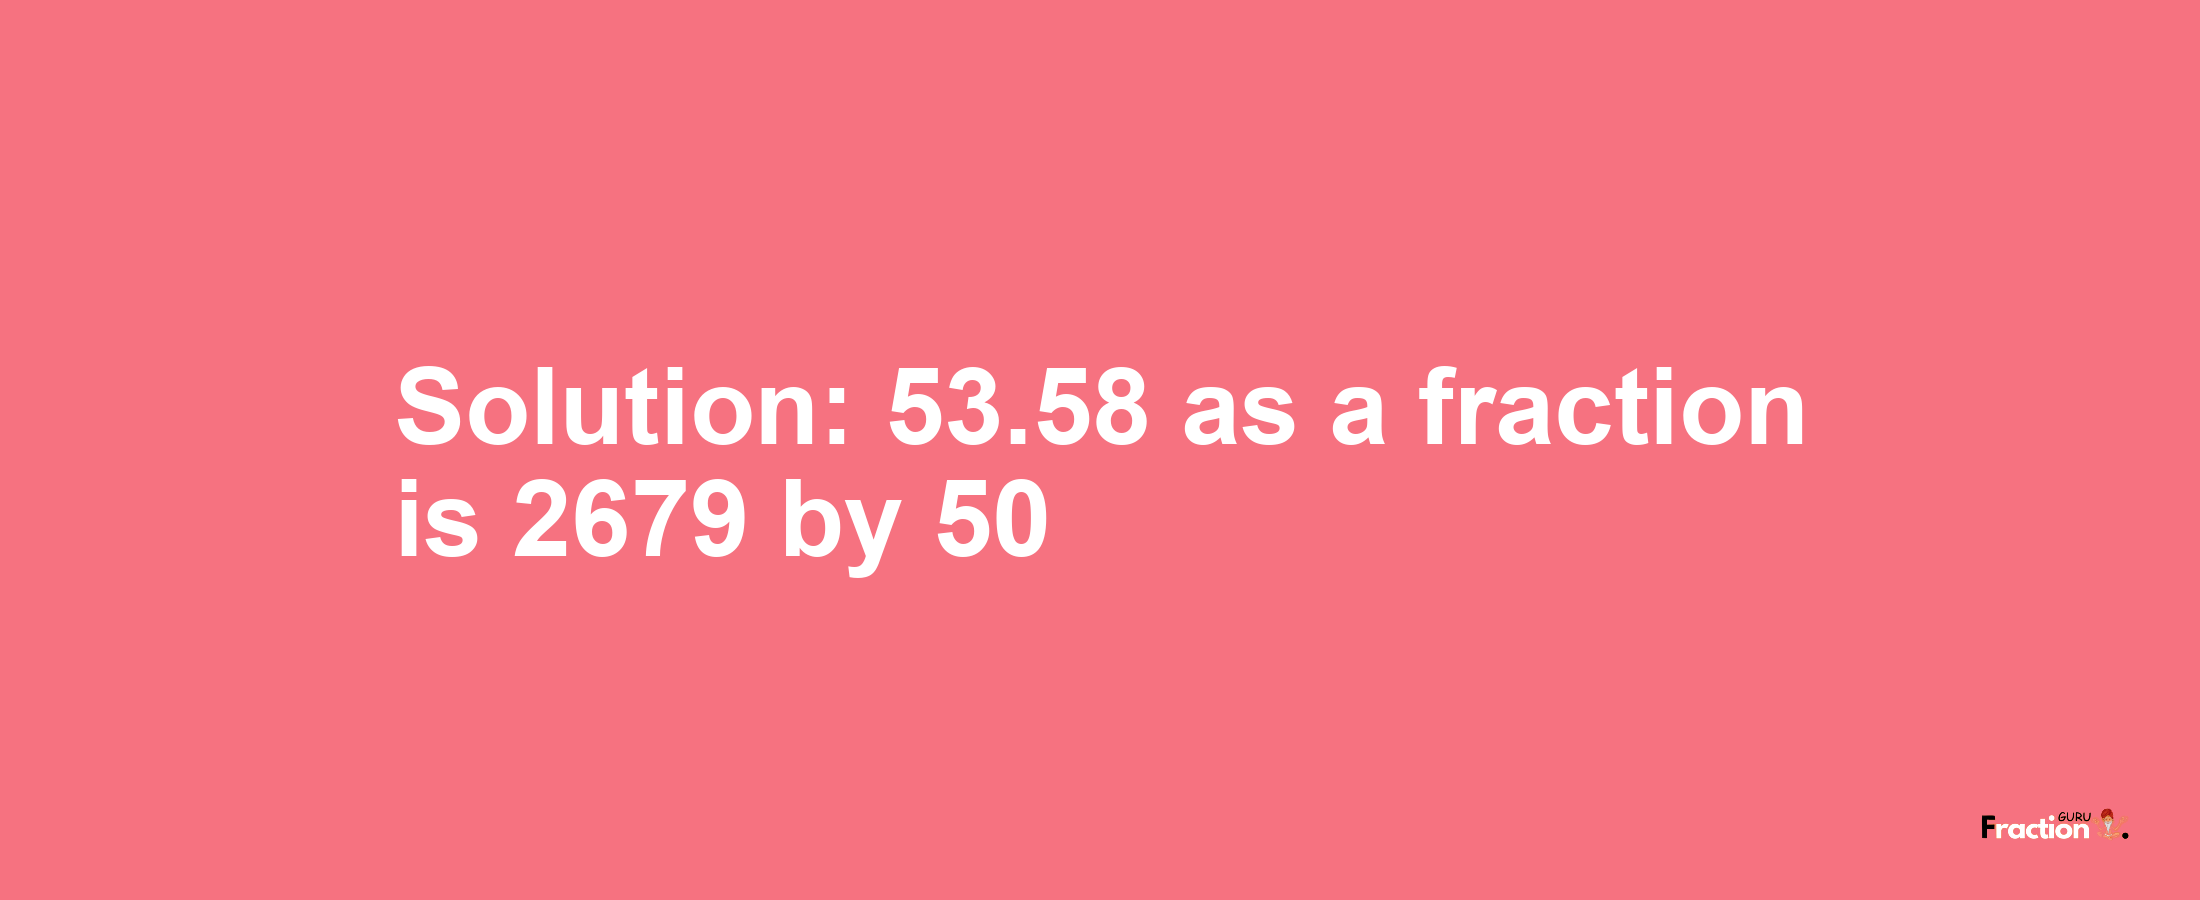 Solution:53.58 as a fraction is 2679/50